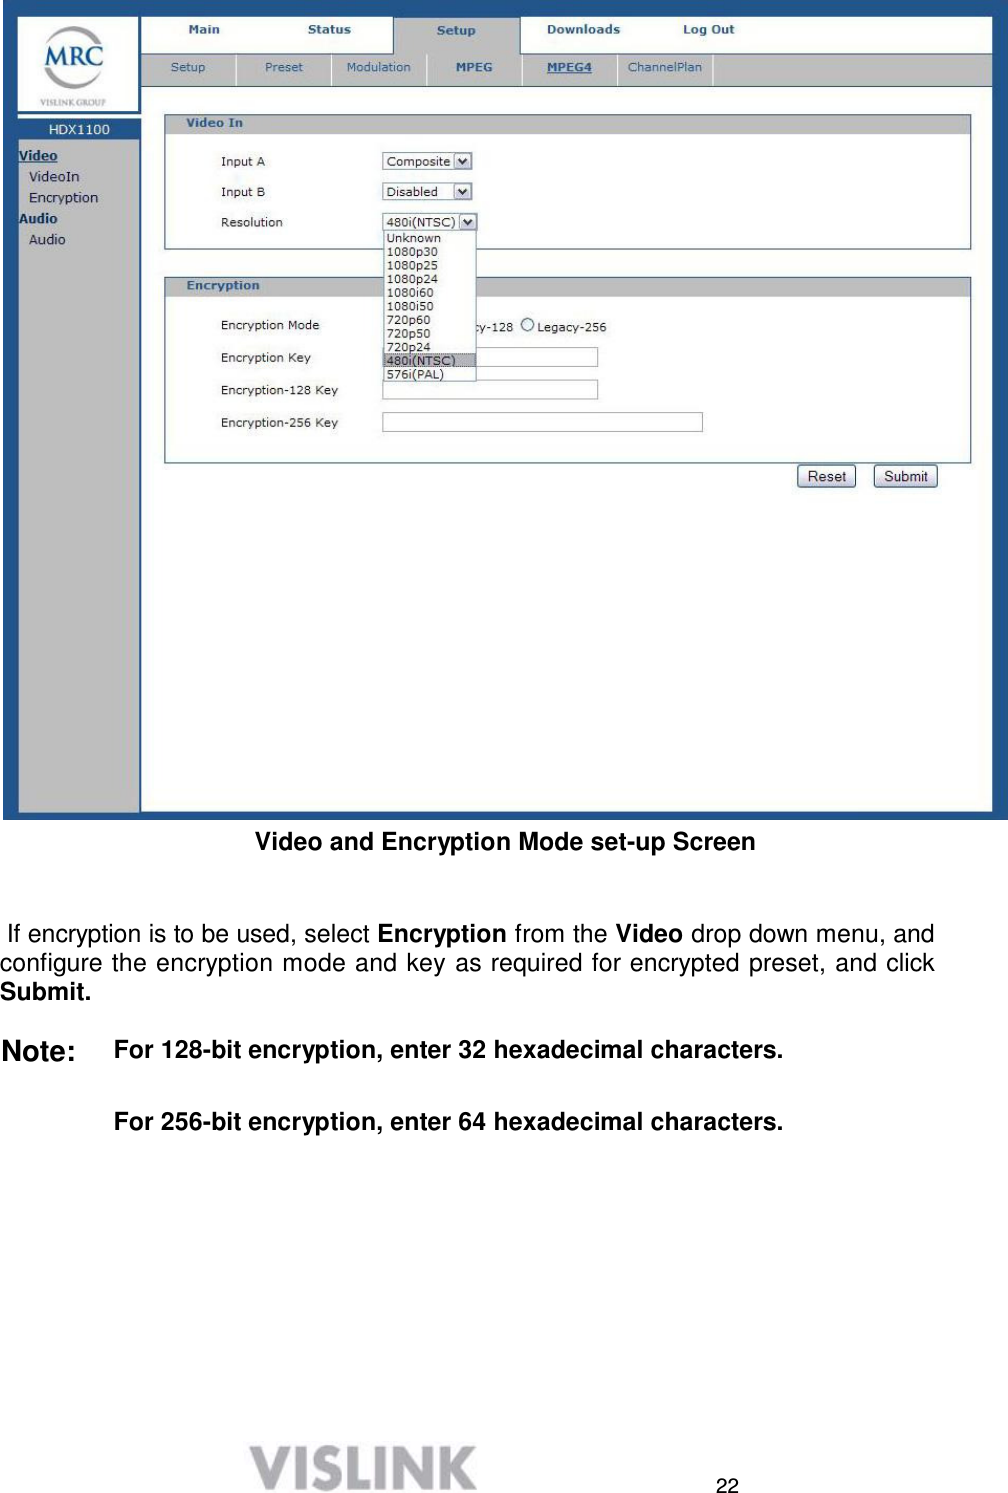  22   Video and Encryption Mode set-up Screen    If encryption is to be used, select Encryption from the Video drop down menu, and configure the encryption mode and key as required for encrypted preset, and click Submit.  Note: For 128-bit encryption, enter 32 hexadecimal characters.   For 256-bit encryption, enter 64 hexadecimal characters. 